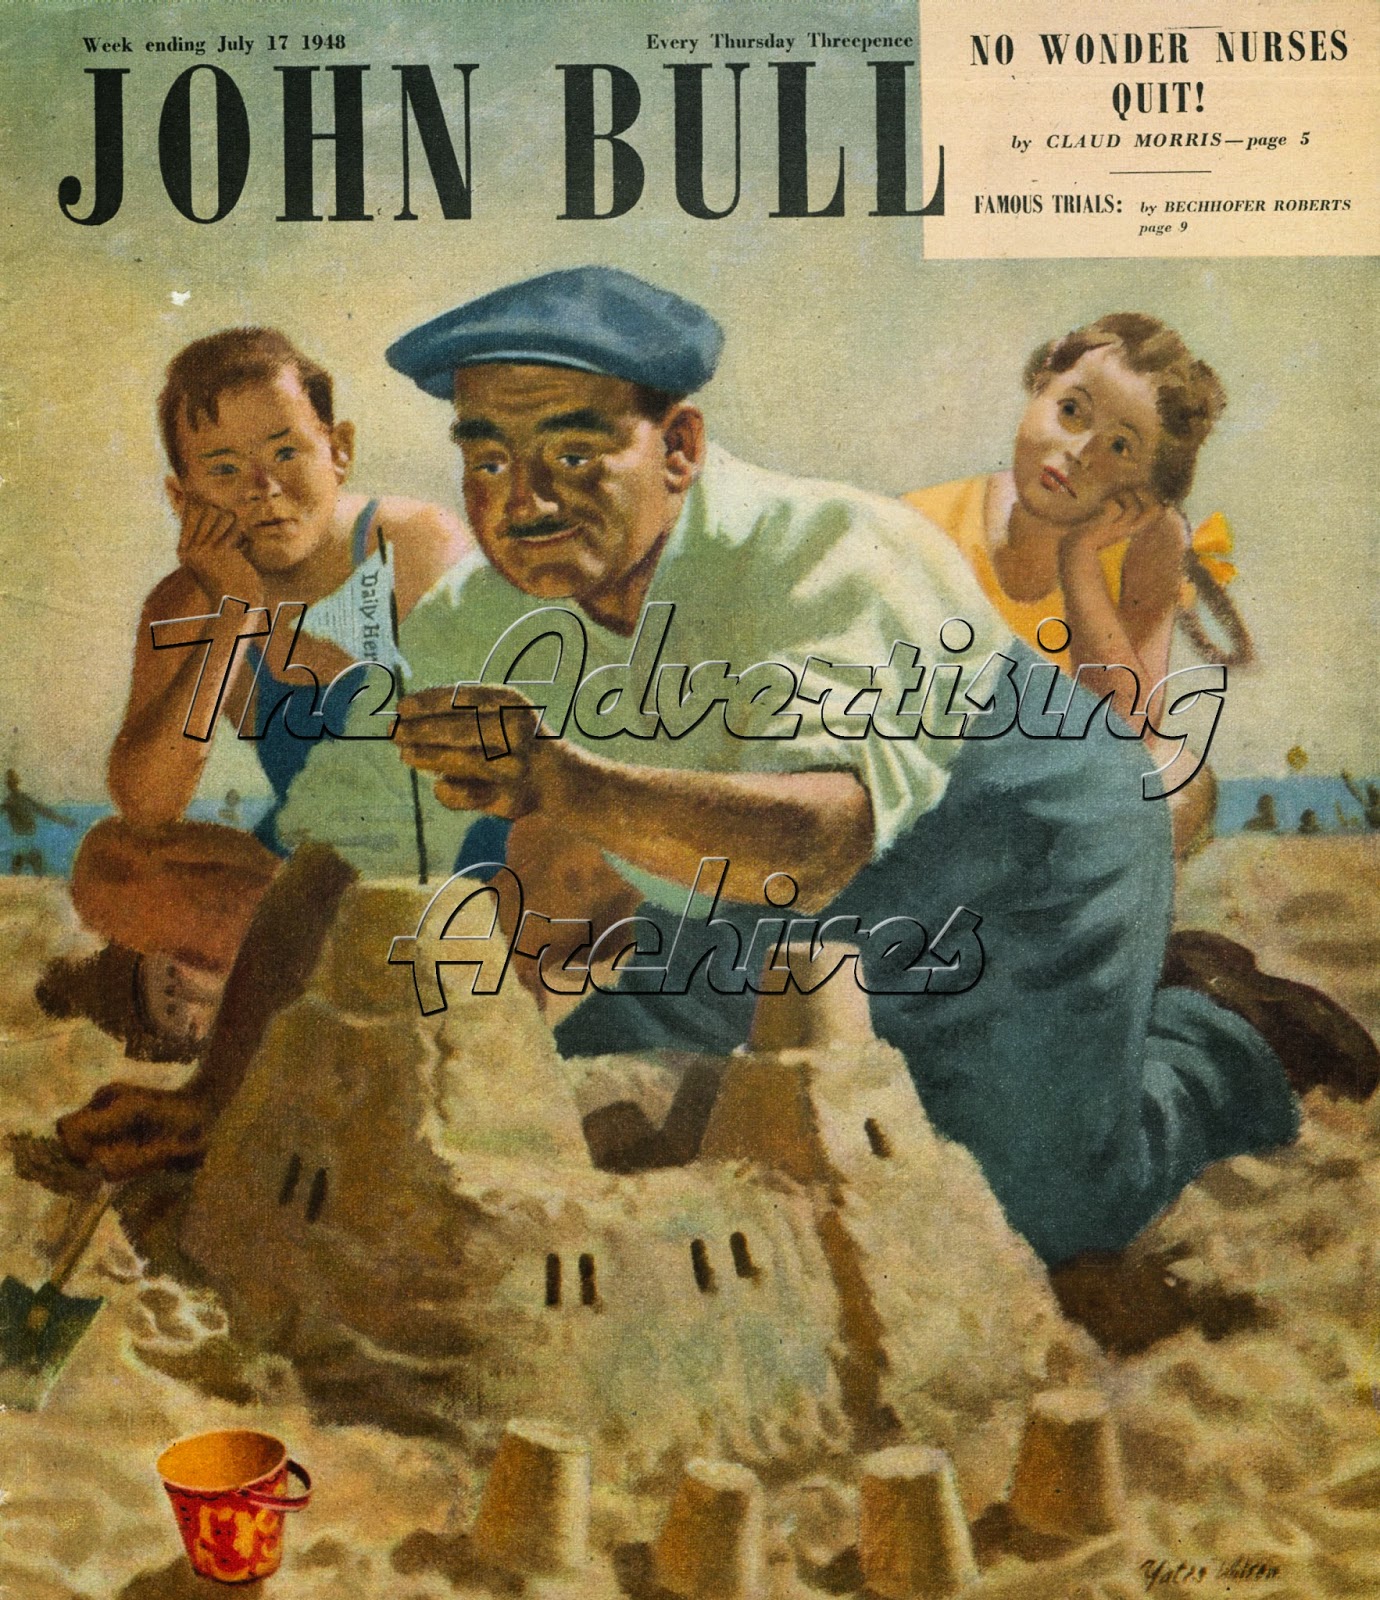 http://www.advertisingarchives.co.uk/index.php?service=search&action=do_quick_search&language=en&q=john+bull+holidays